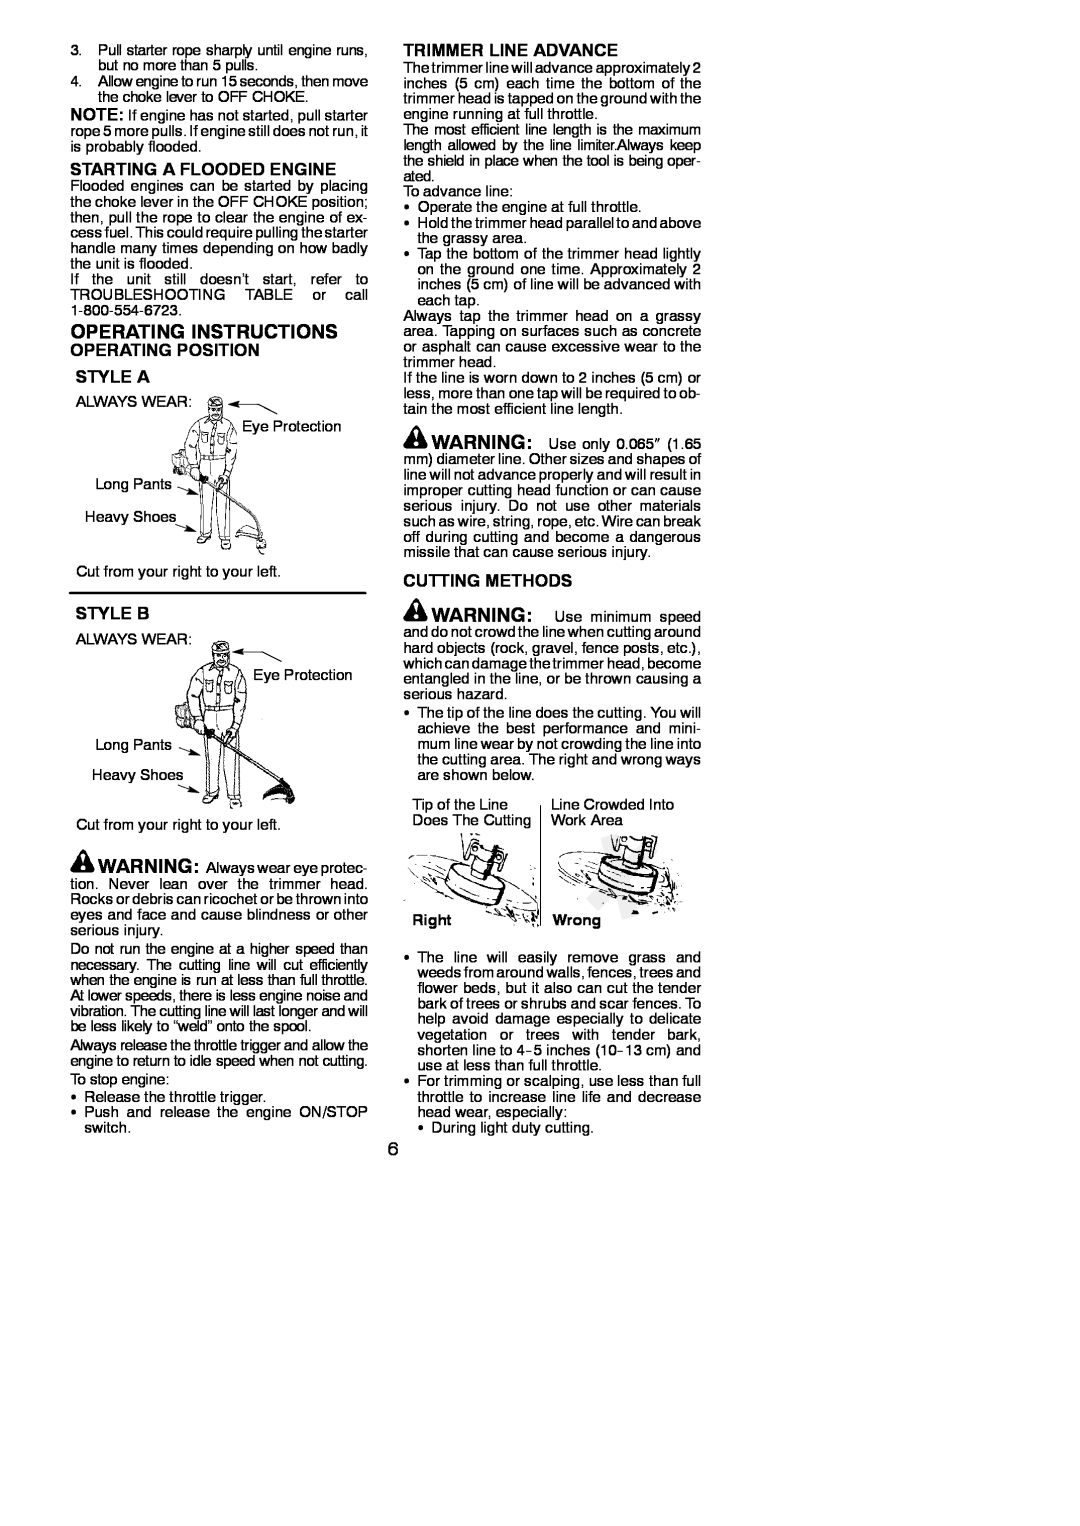 Weed Eater XT 25 Operating Instructions, Starting A Flooded Engine, Operating Position Style A, Style B, Cutting Methods 